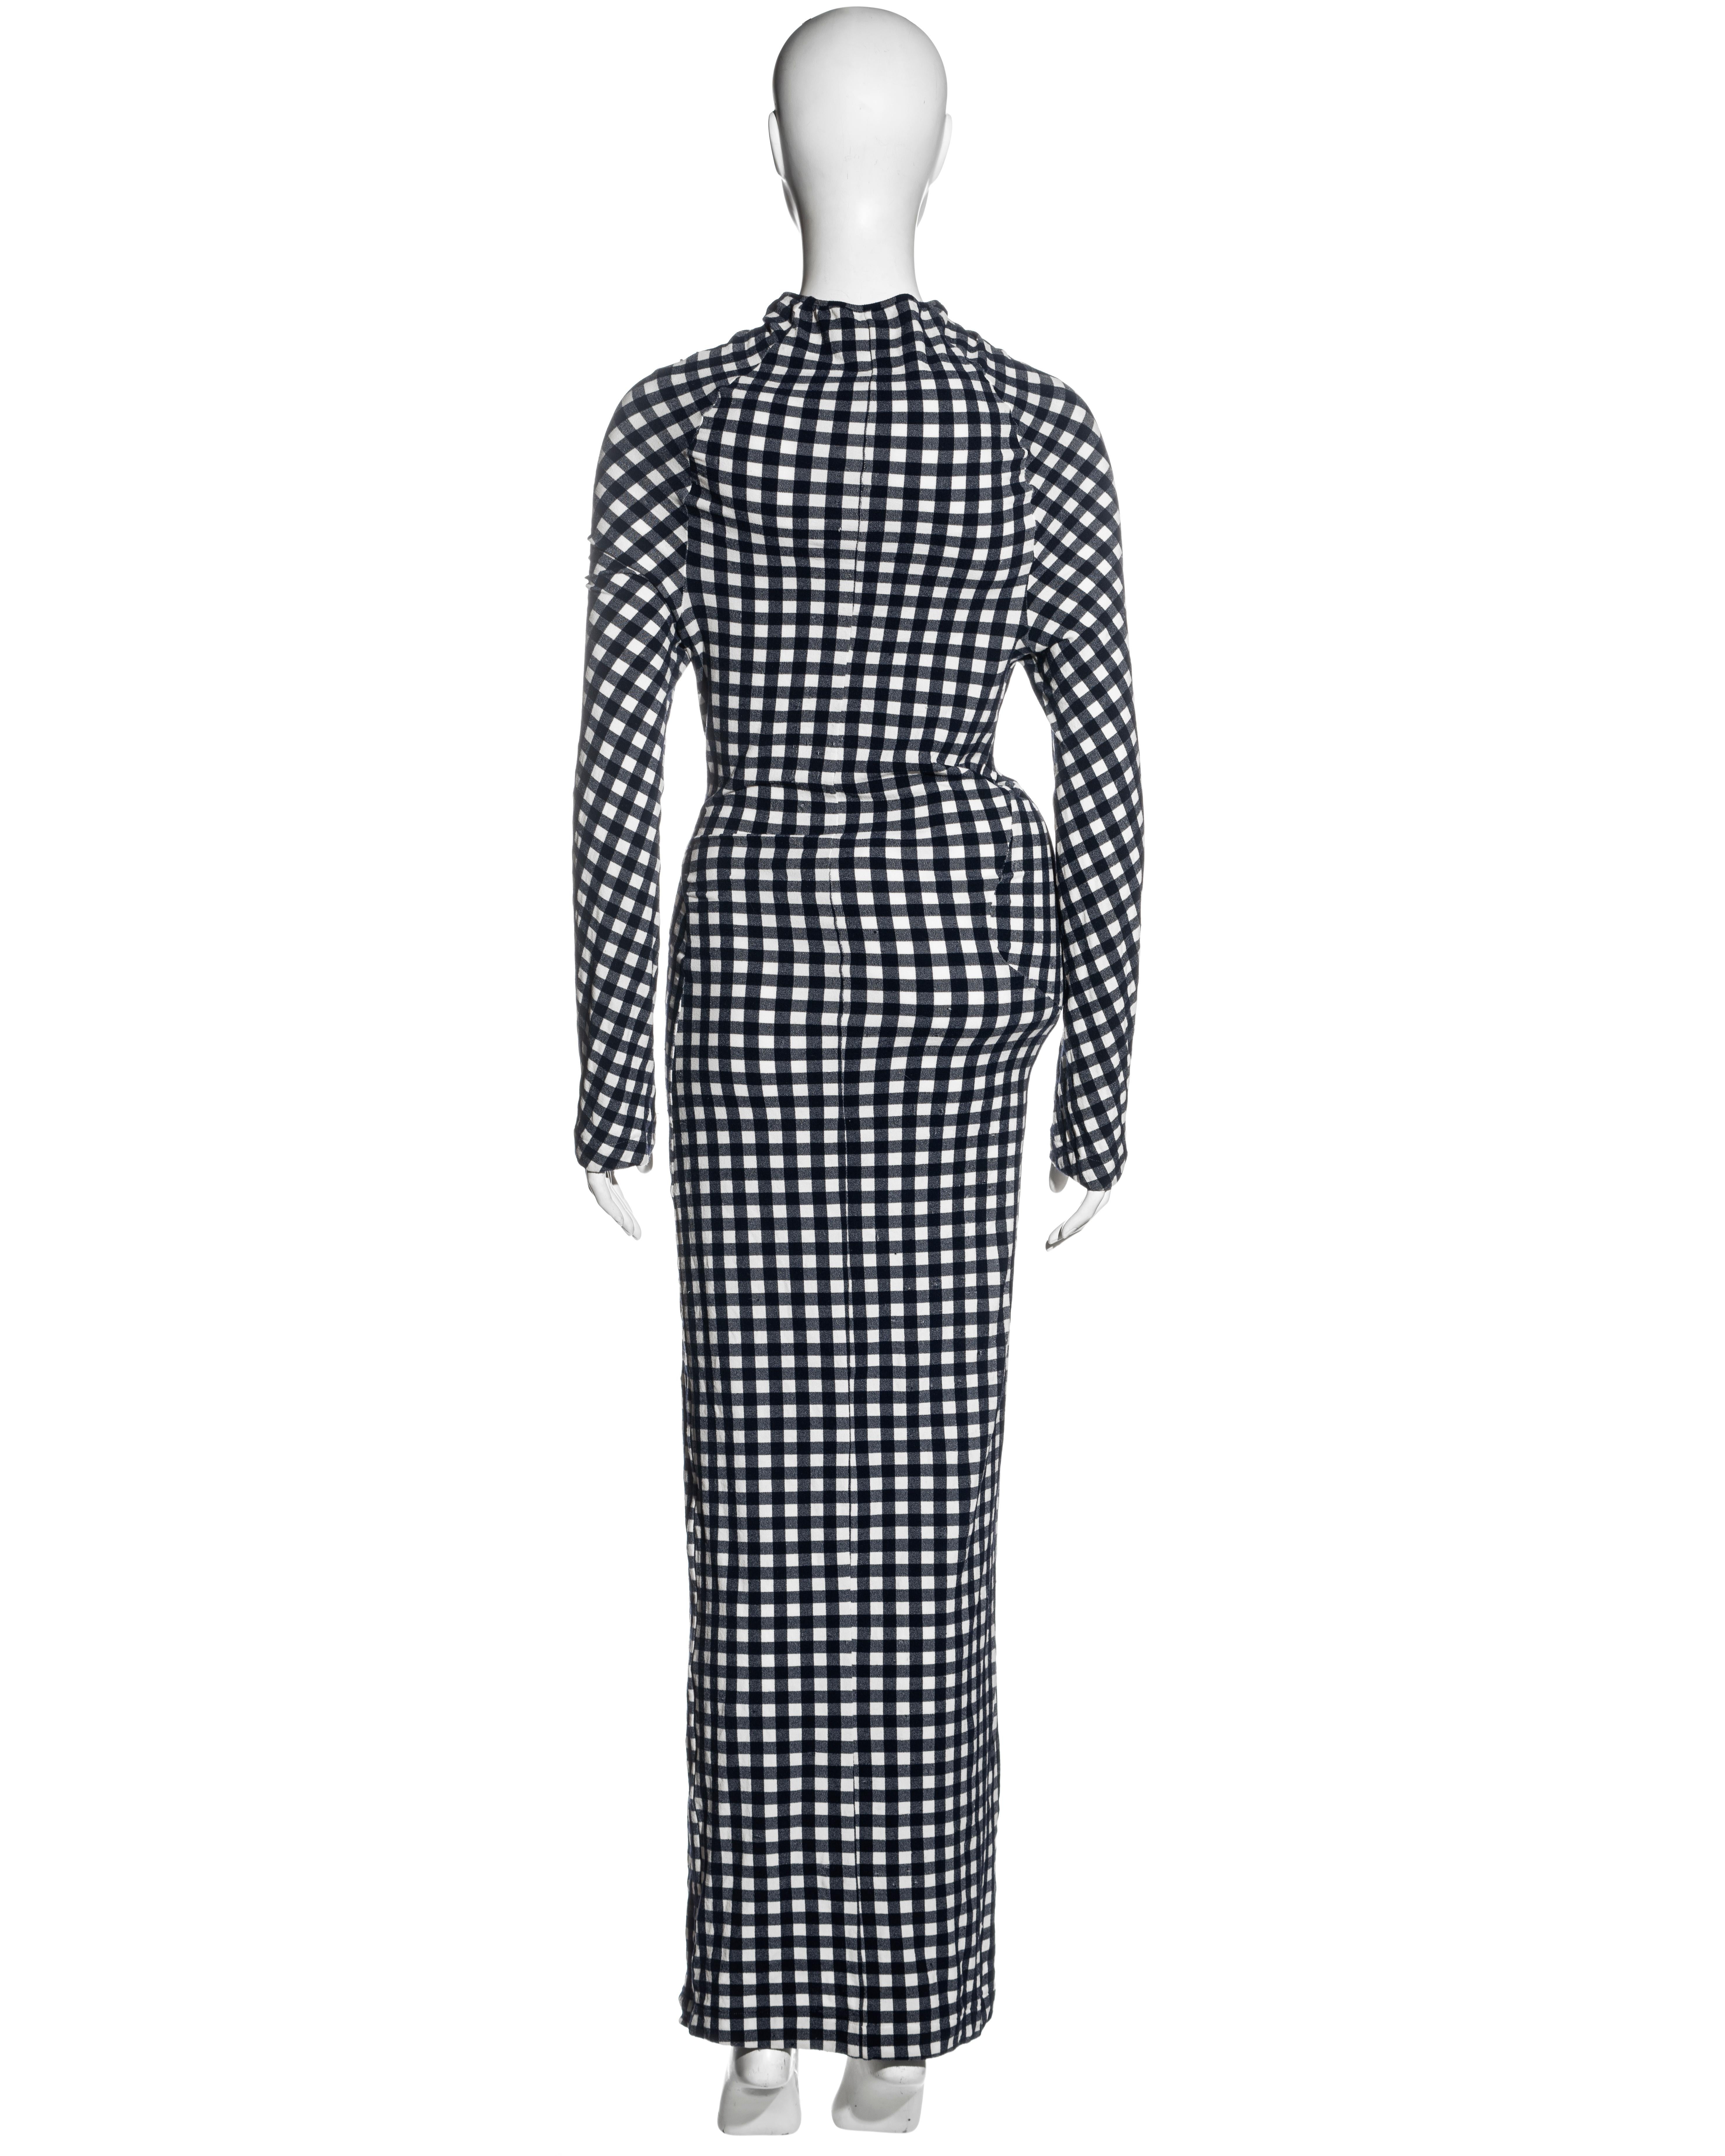 Comme des Garcons navy and white gingham 2-piece dress with pillows, ss 1997 11